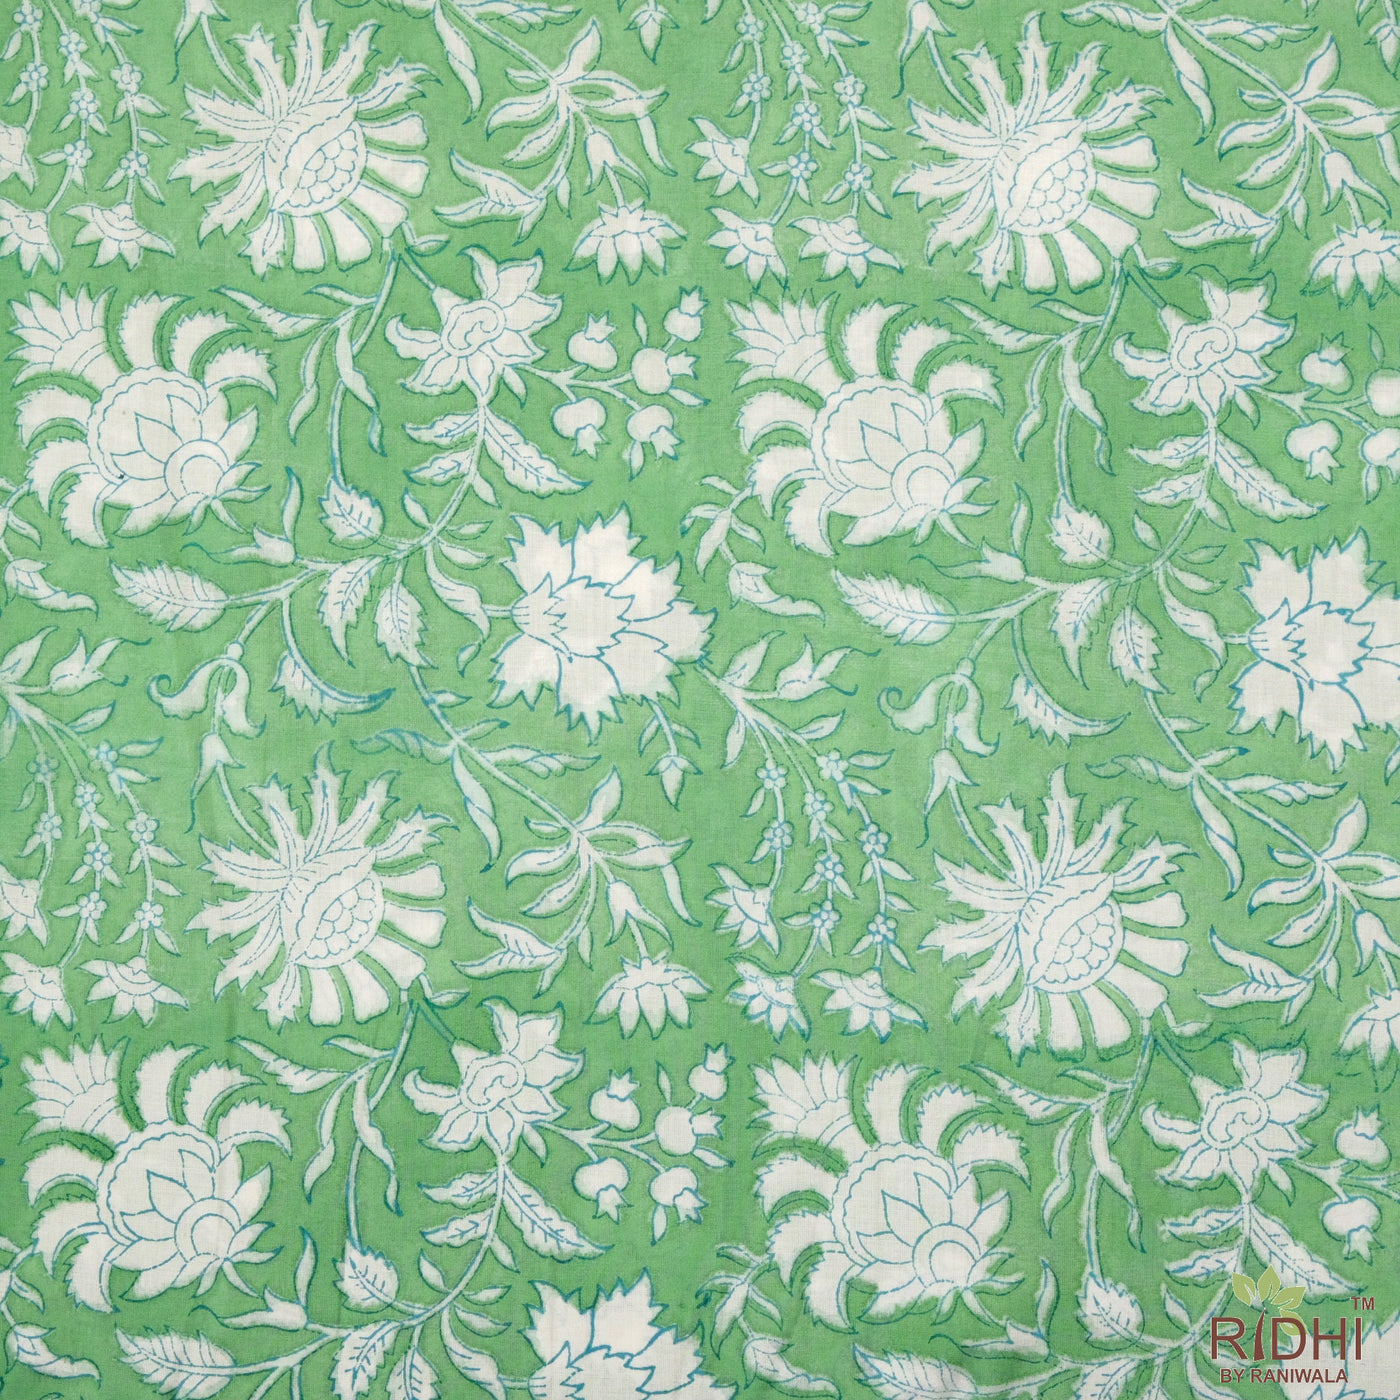 Mint Green and White Indian Floral Hand Block Printed Block Printed Cotton Cloth, Fabric by the yard, Women's Clothing Curtains Pillows Bags